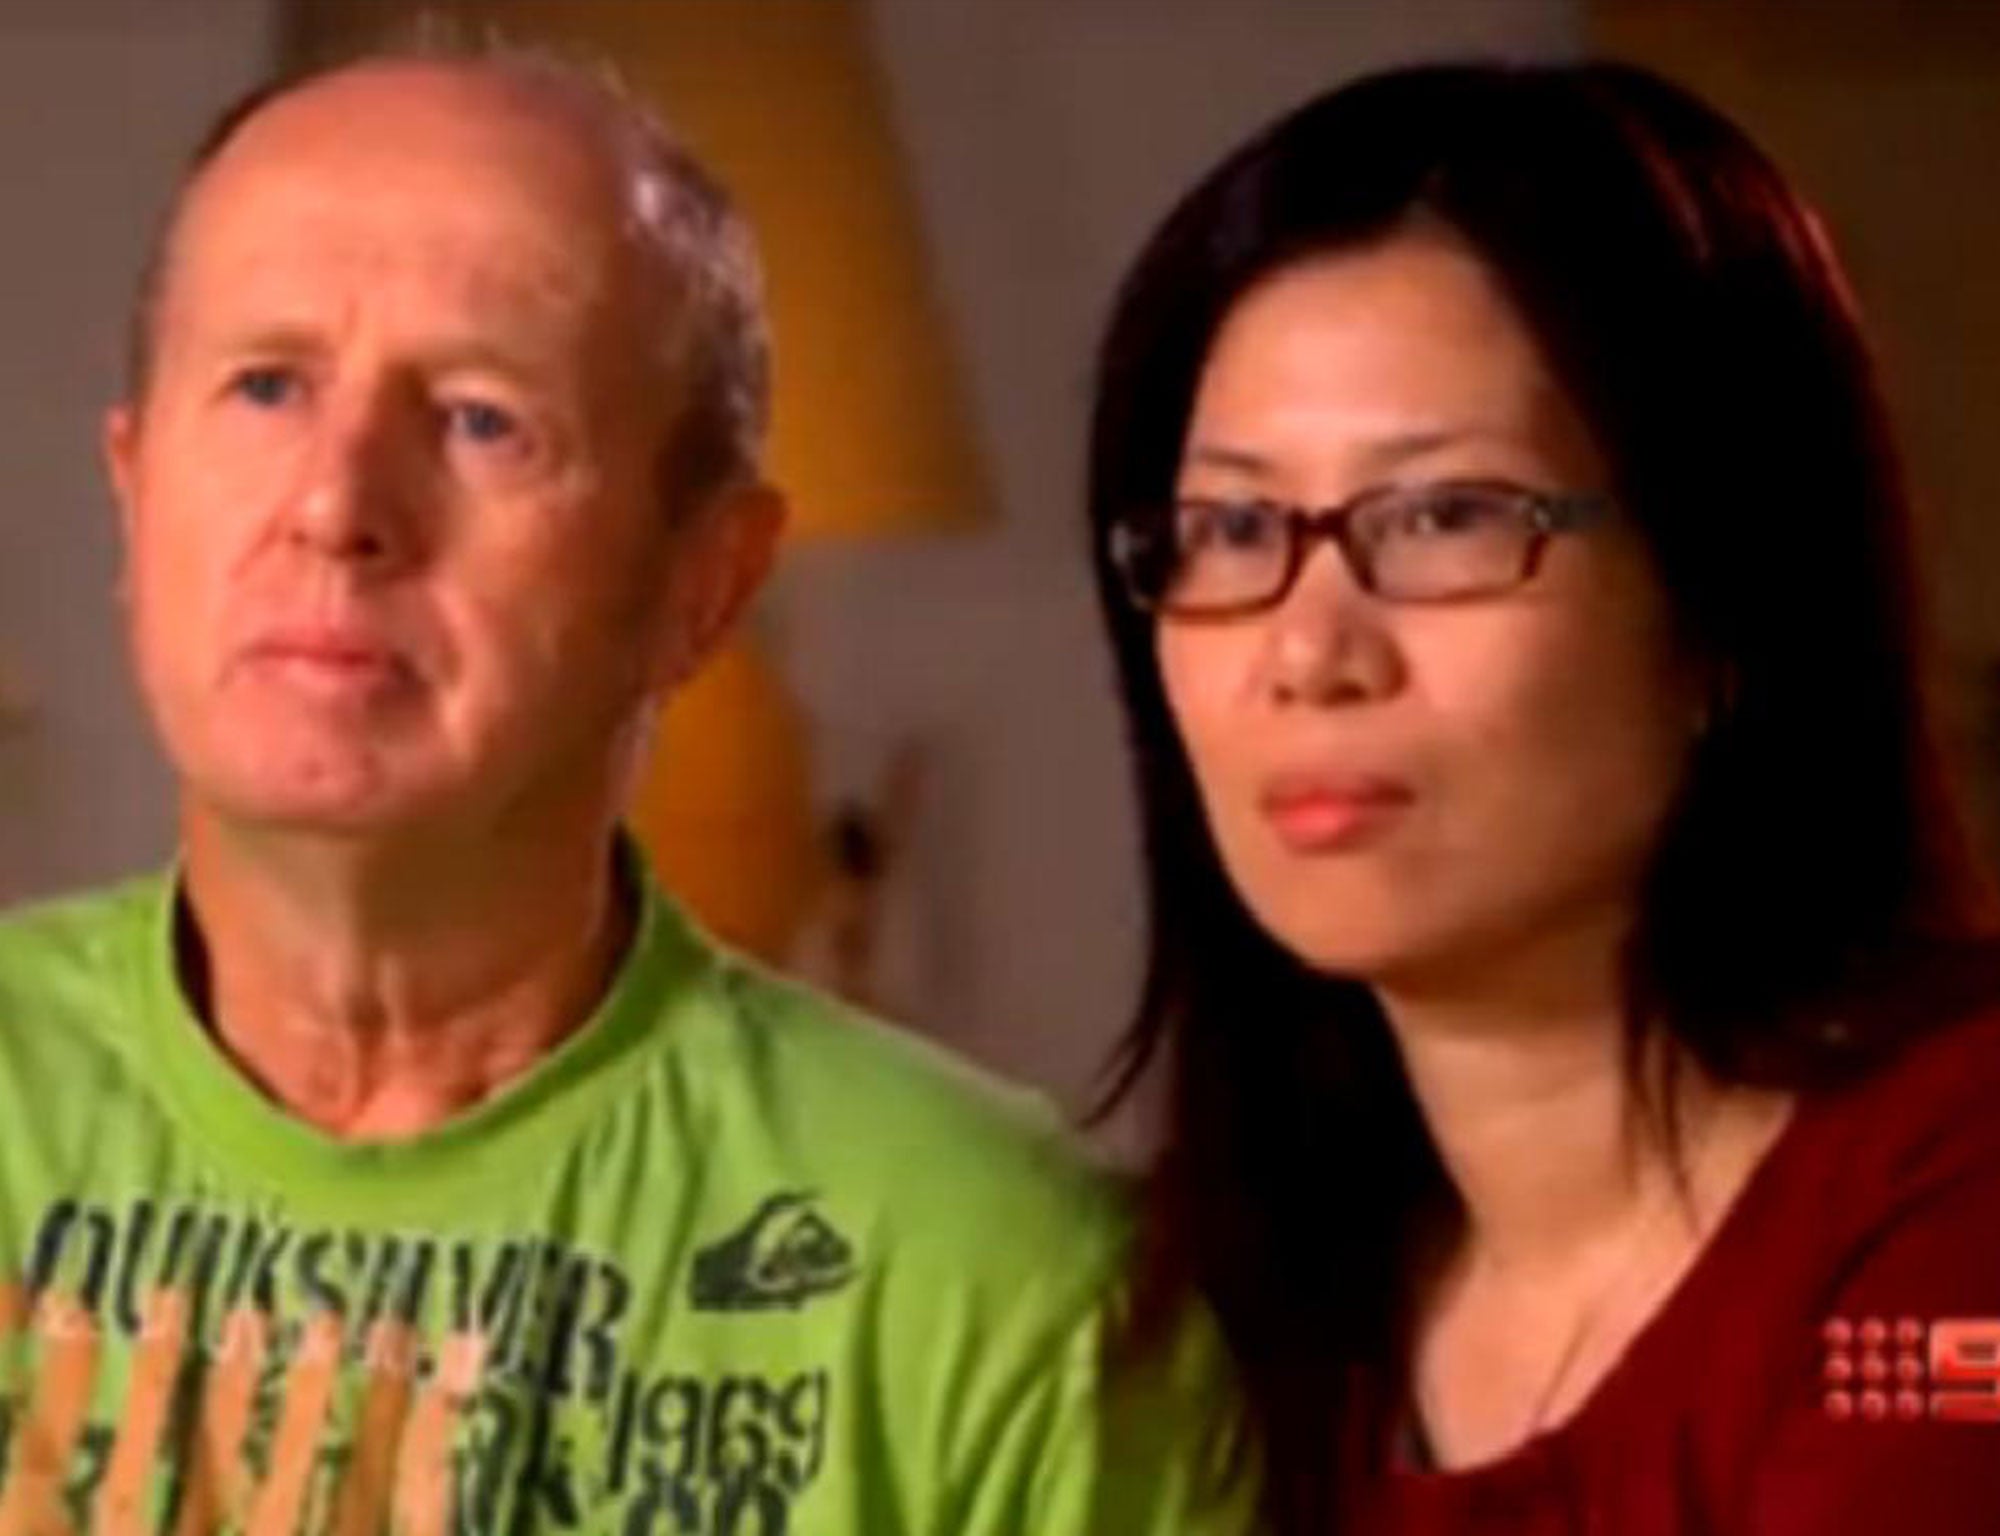 In a statement released ahead of their appearance on the Australian TV show 60 Minutes, David and Wendy Farnell (pictured) said they would like Australia to hear their side of the story, before passing judgement on them.